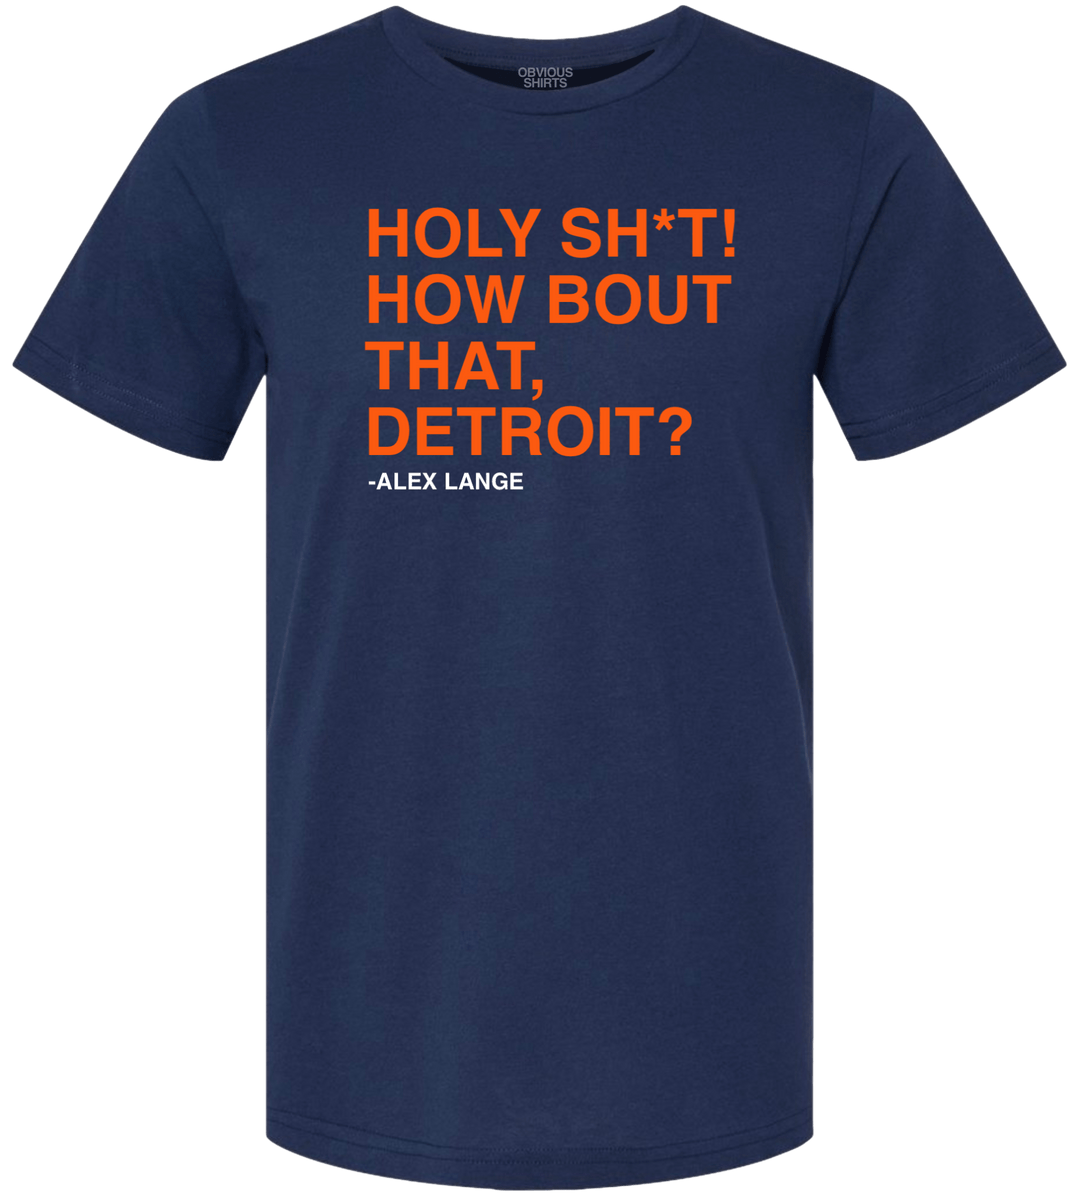 HOLY SH*T! HOW BOUT THAT, DETROIT? - OBVIOUS SHIRTS